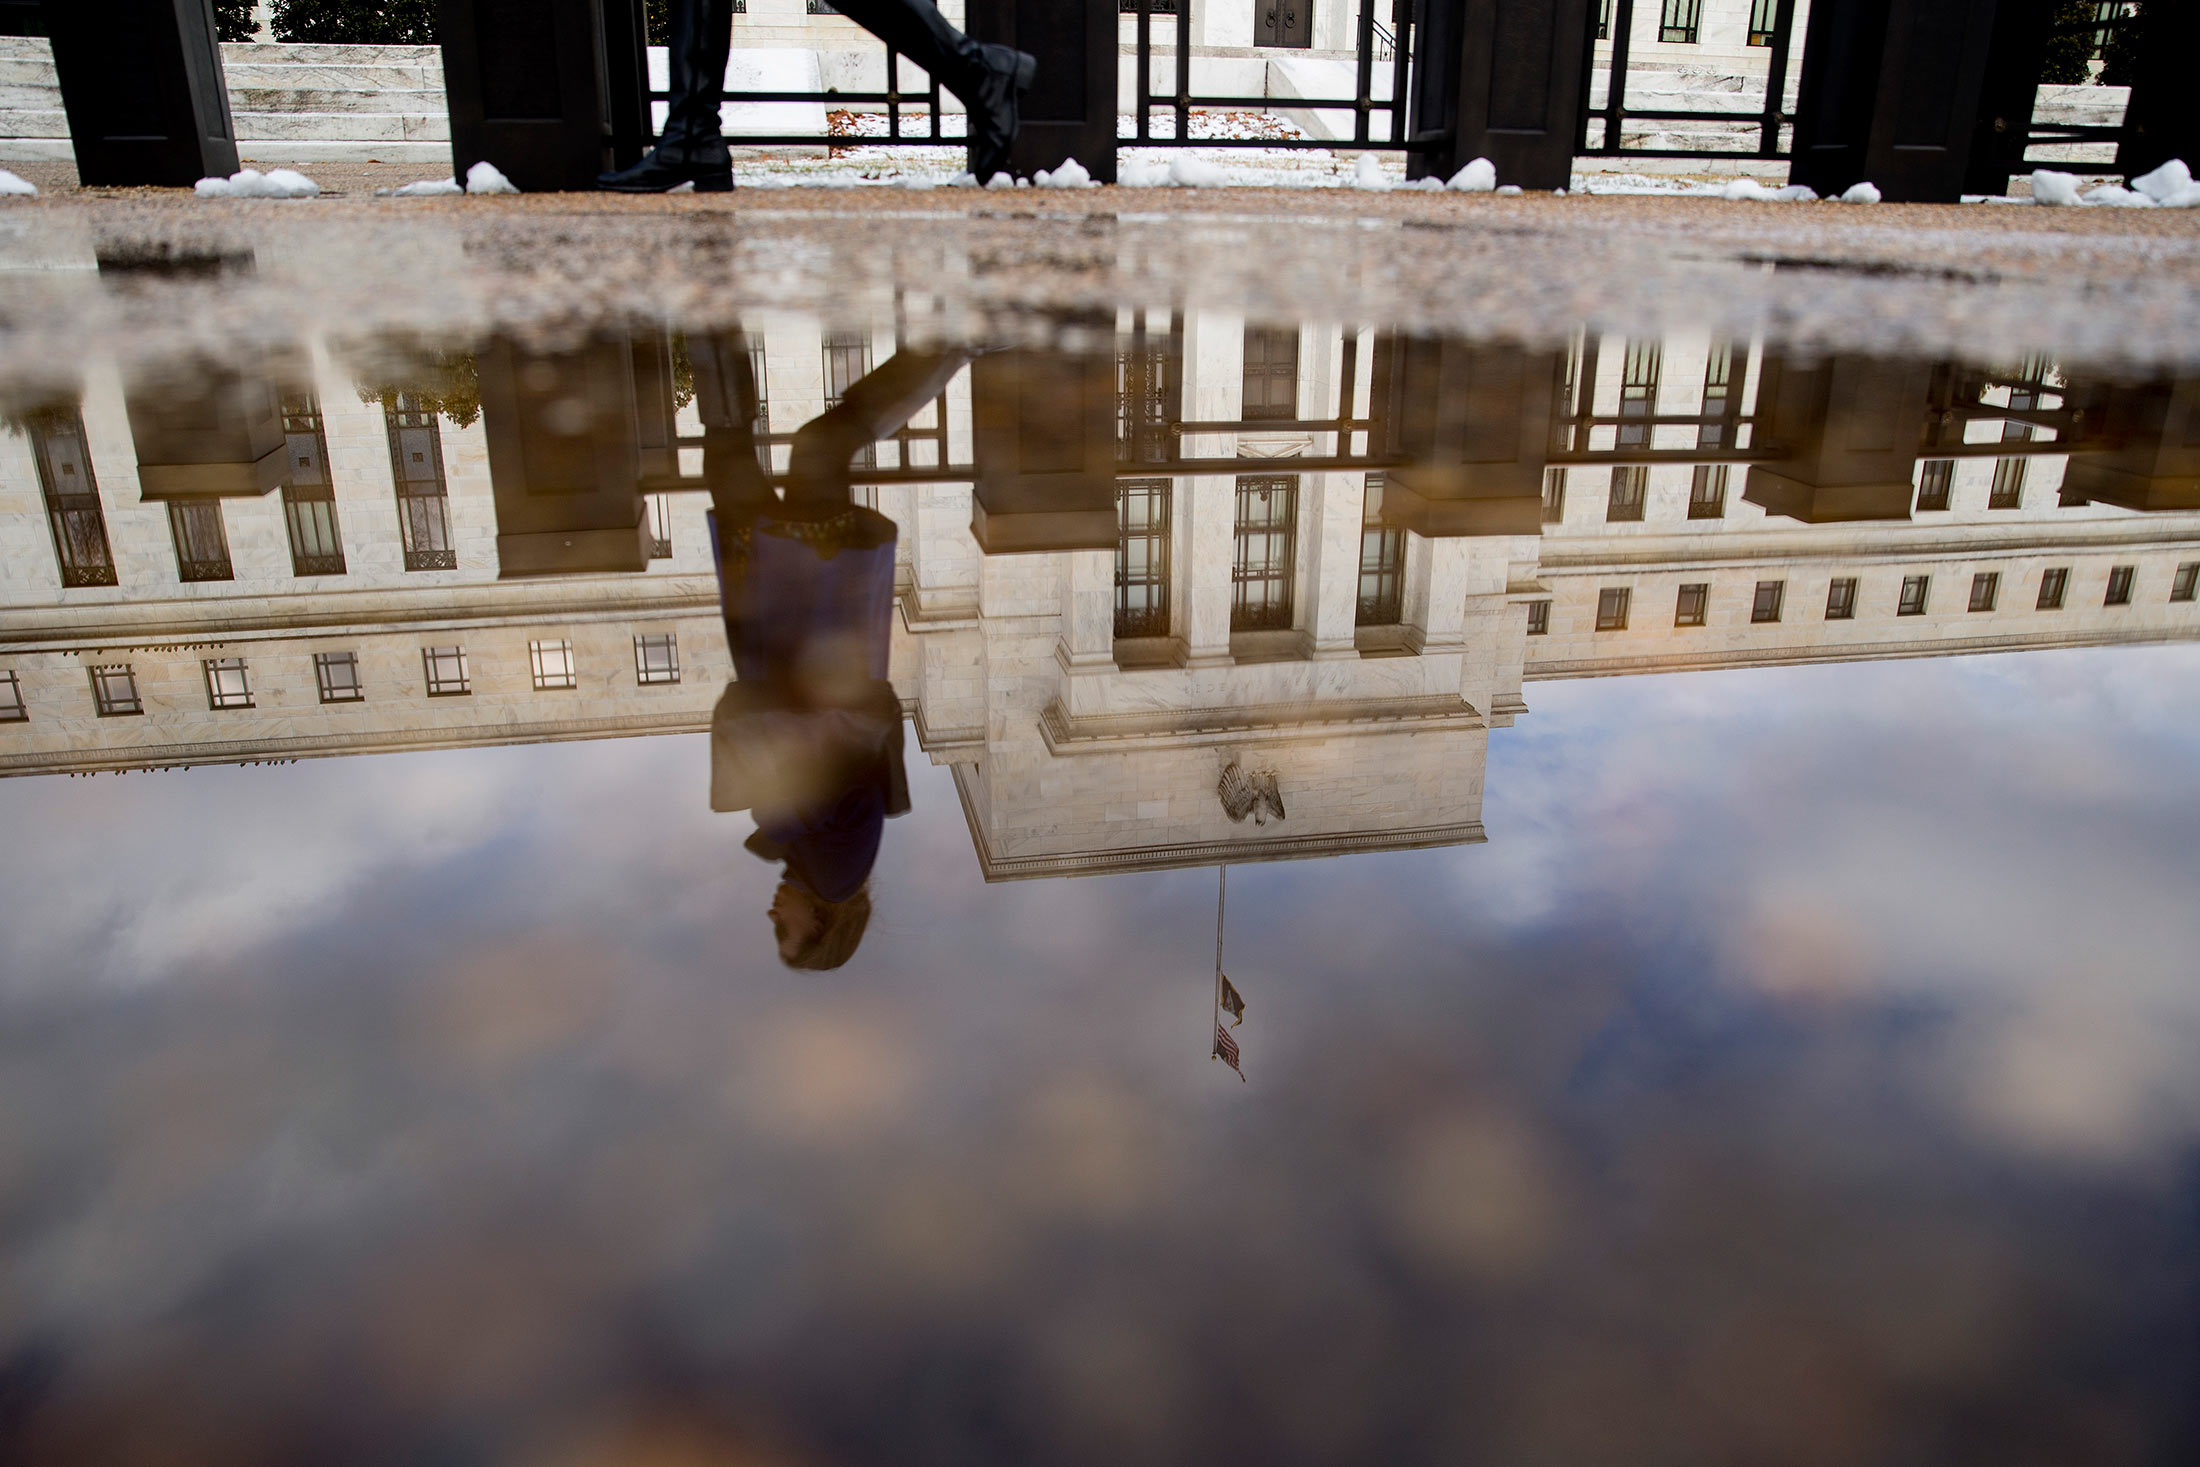 A woman walks past the Marriner S. Eccles Federal Reserve building in Washington D.C.
